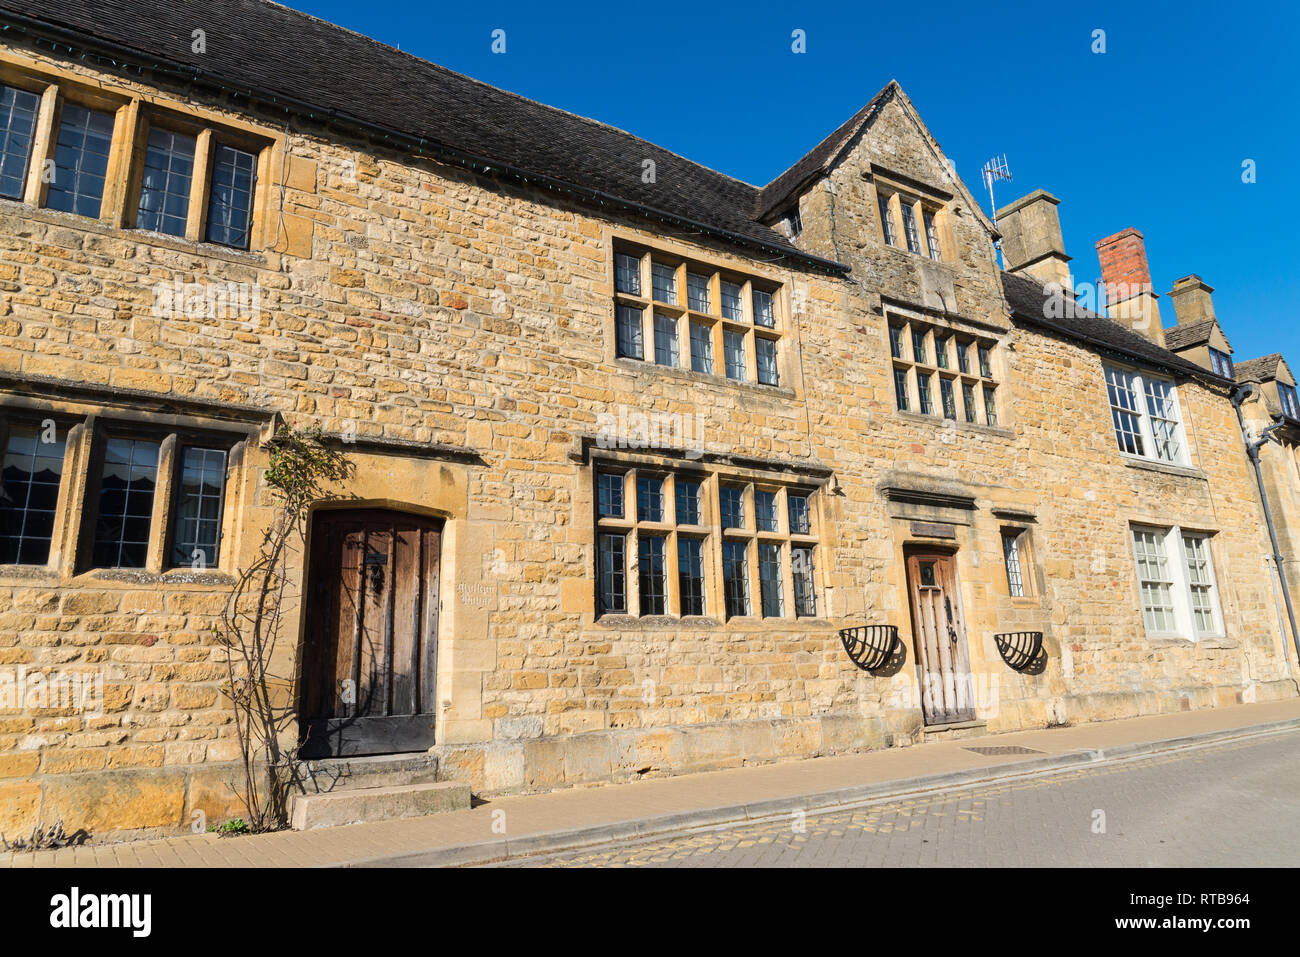 Cotswold stone buildings in the pretty Cotswold market town of Chipping Campden, Gloucestershire Stock Photo